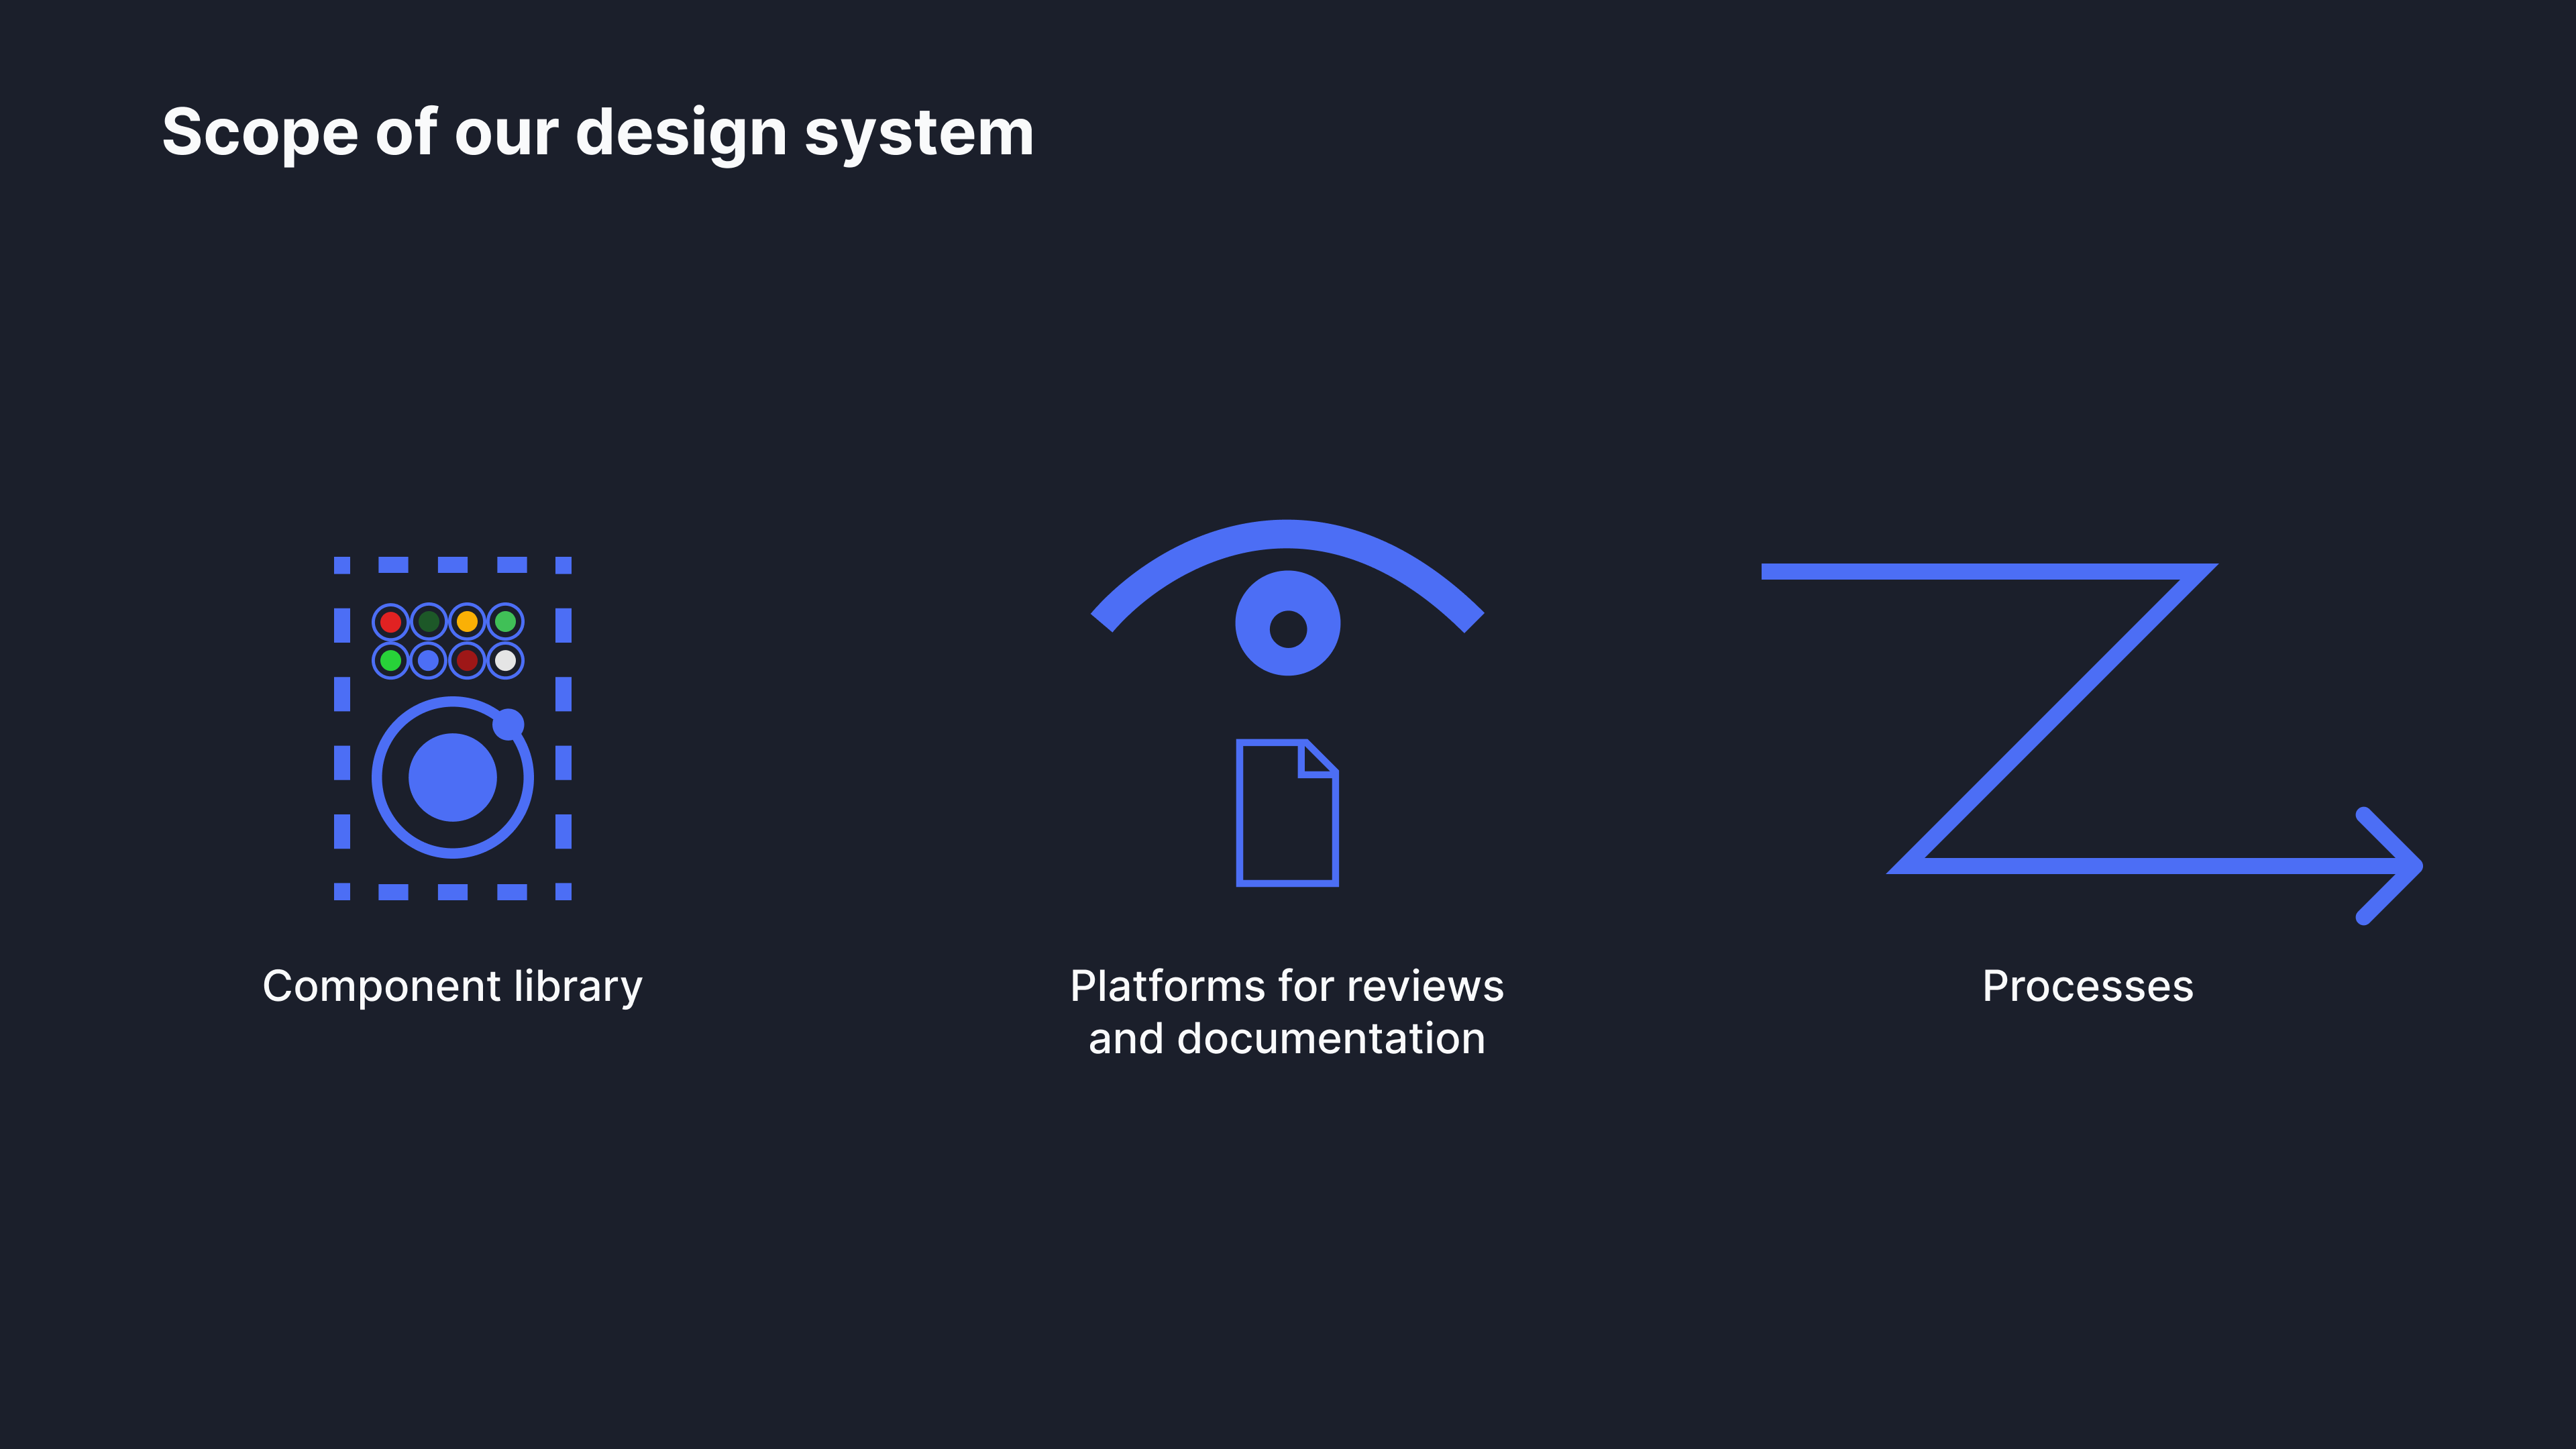 Design systems